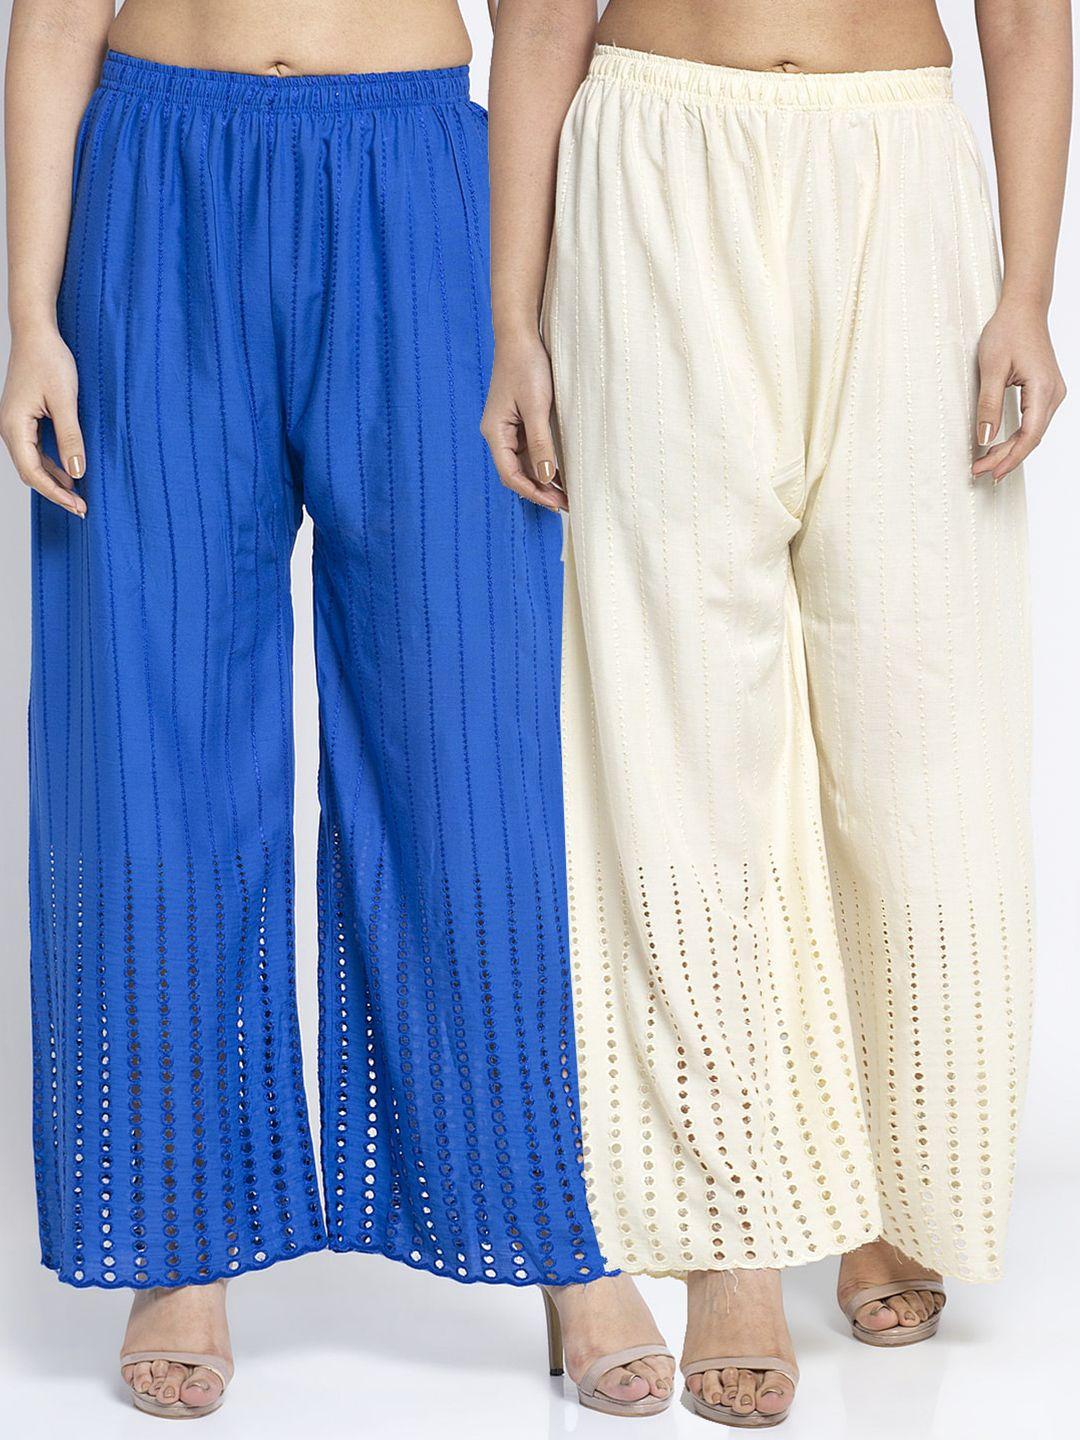 gracit women set of 2 blue & cream-coloured  knitted ethnic palazzos